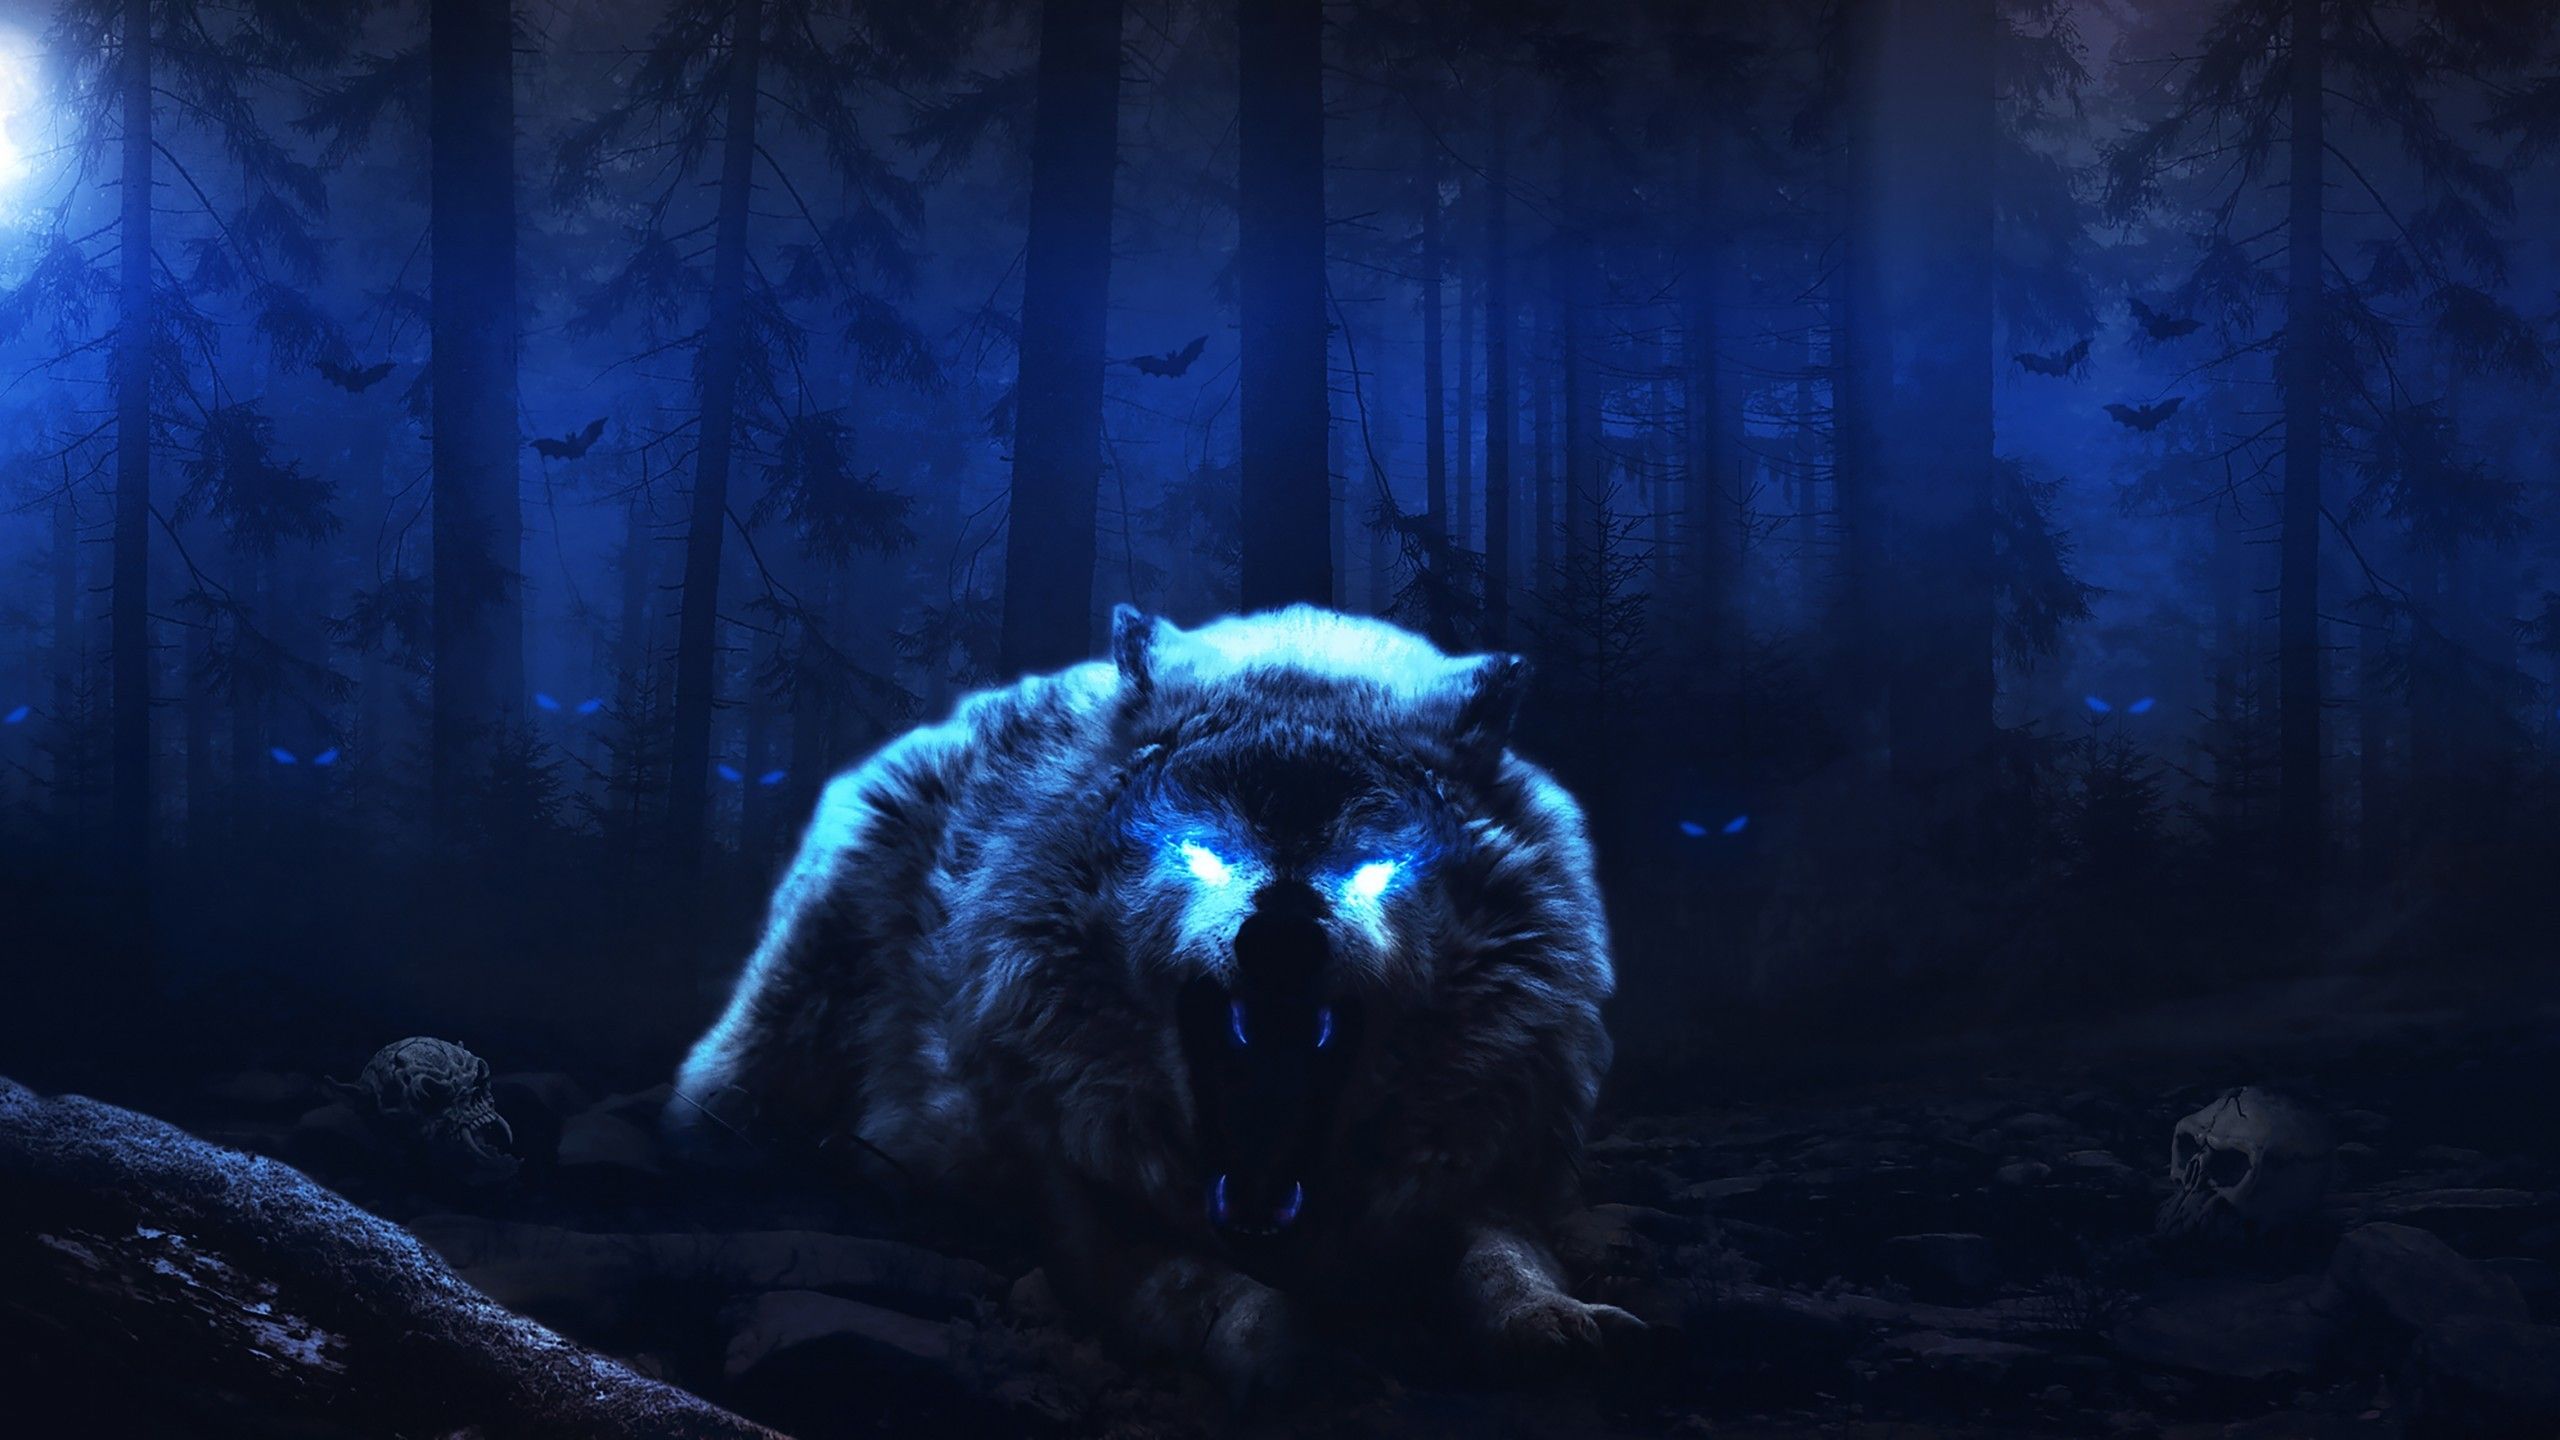 Download 2560x1440 White Wolf, Scary, Night, Dark Forest, Monster Wallpaper for iMac 27 inch